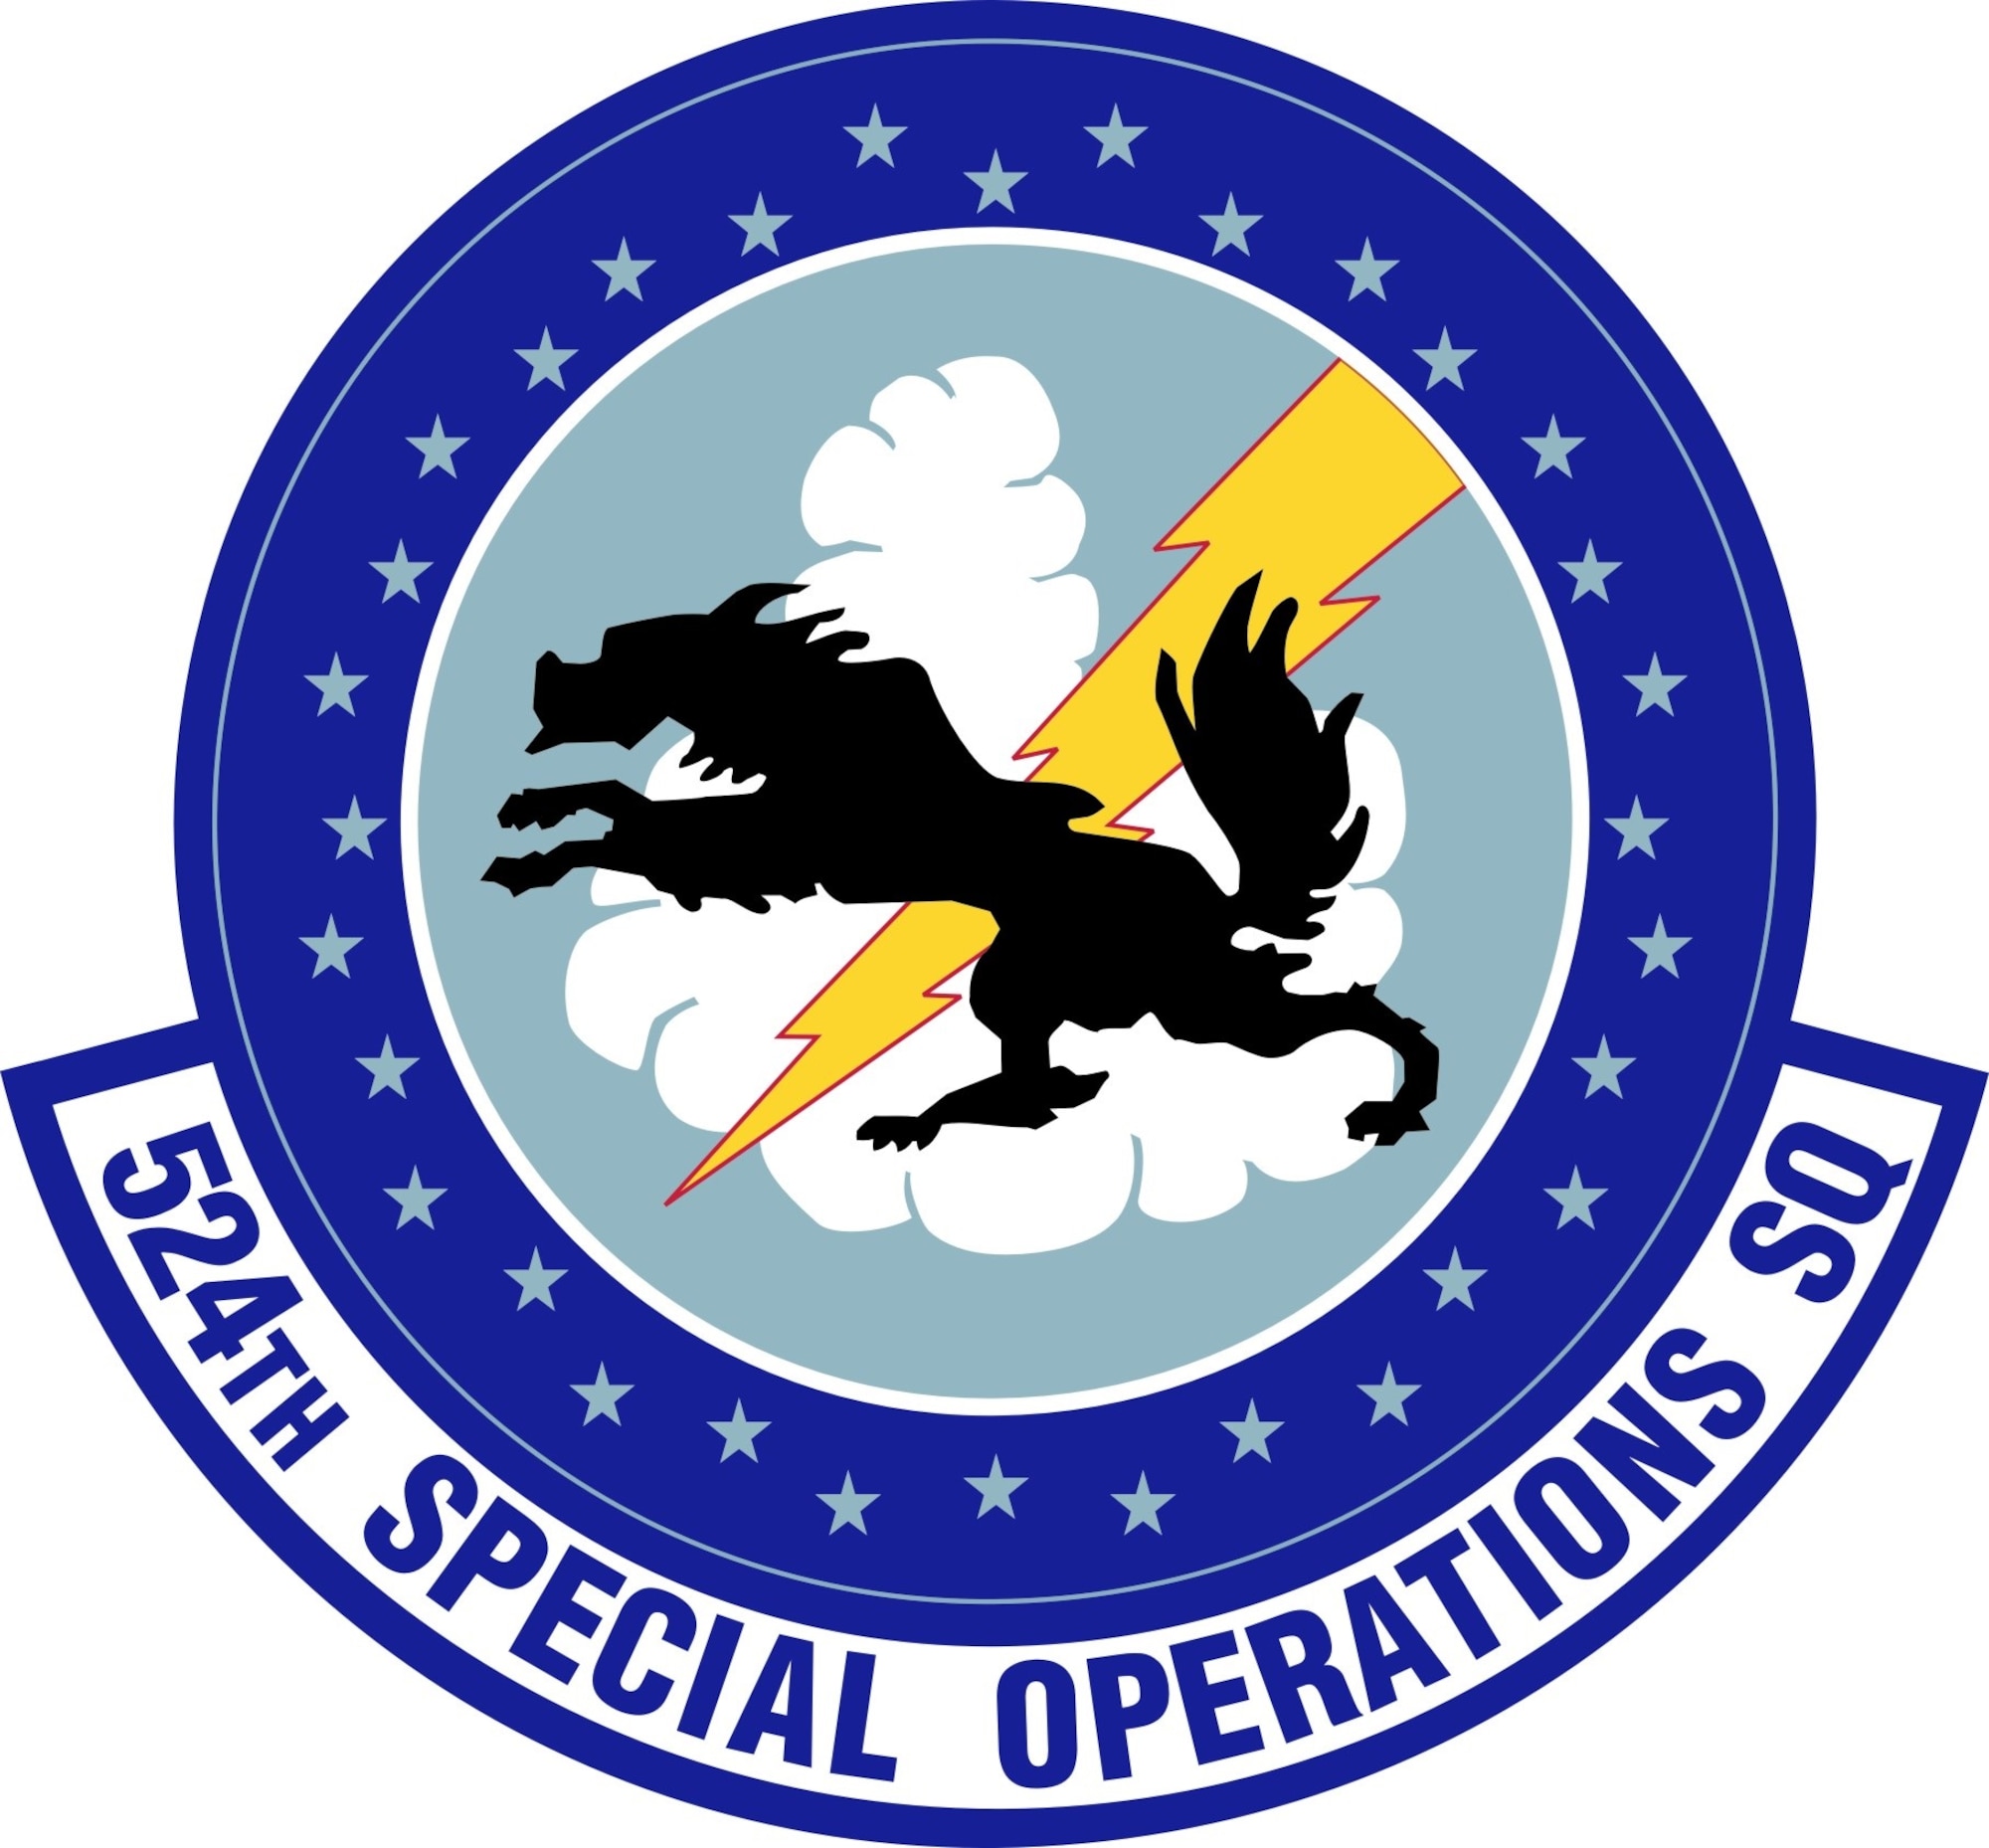 Unit emblem of the 524th Special Operations Wing